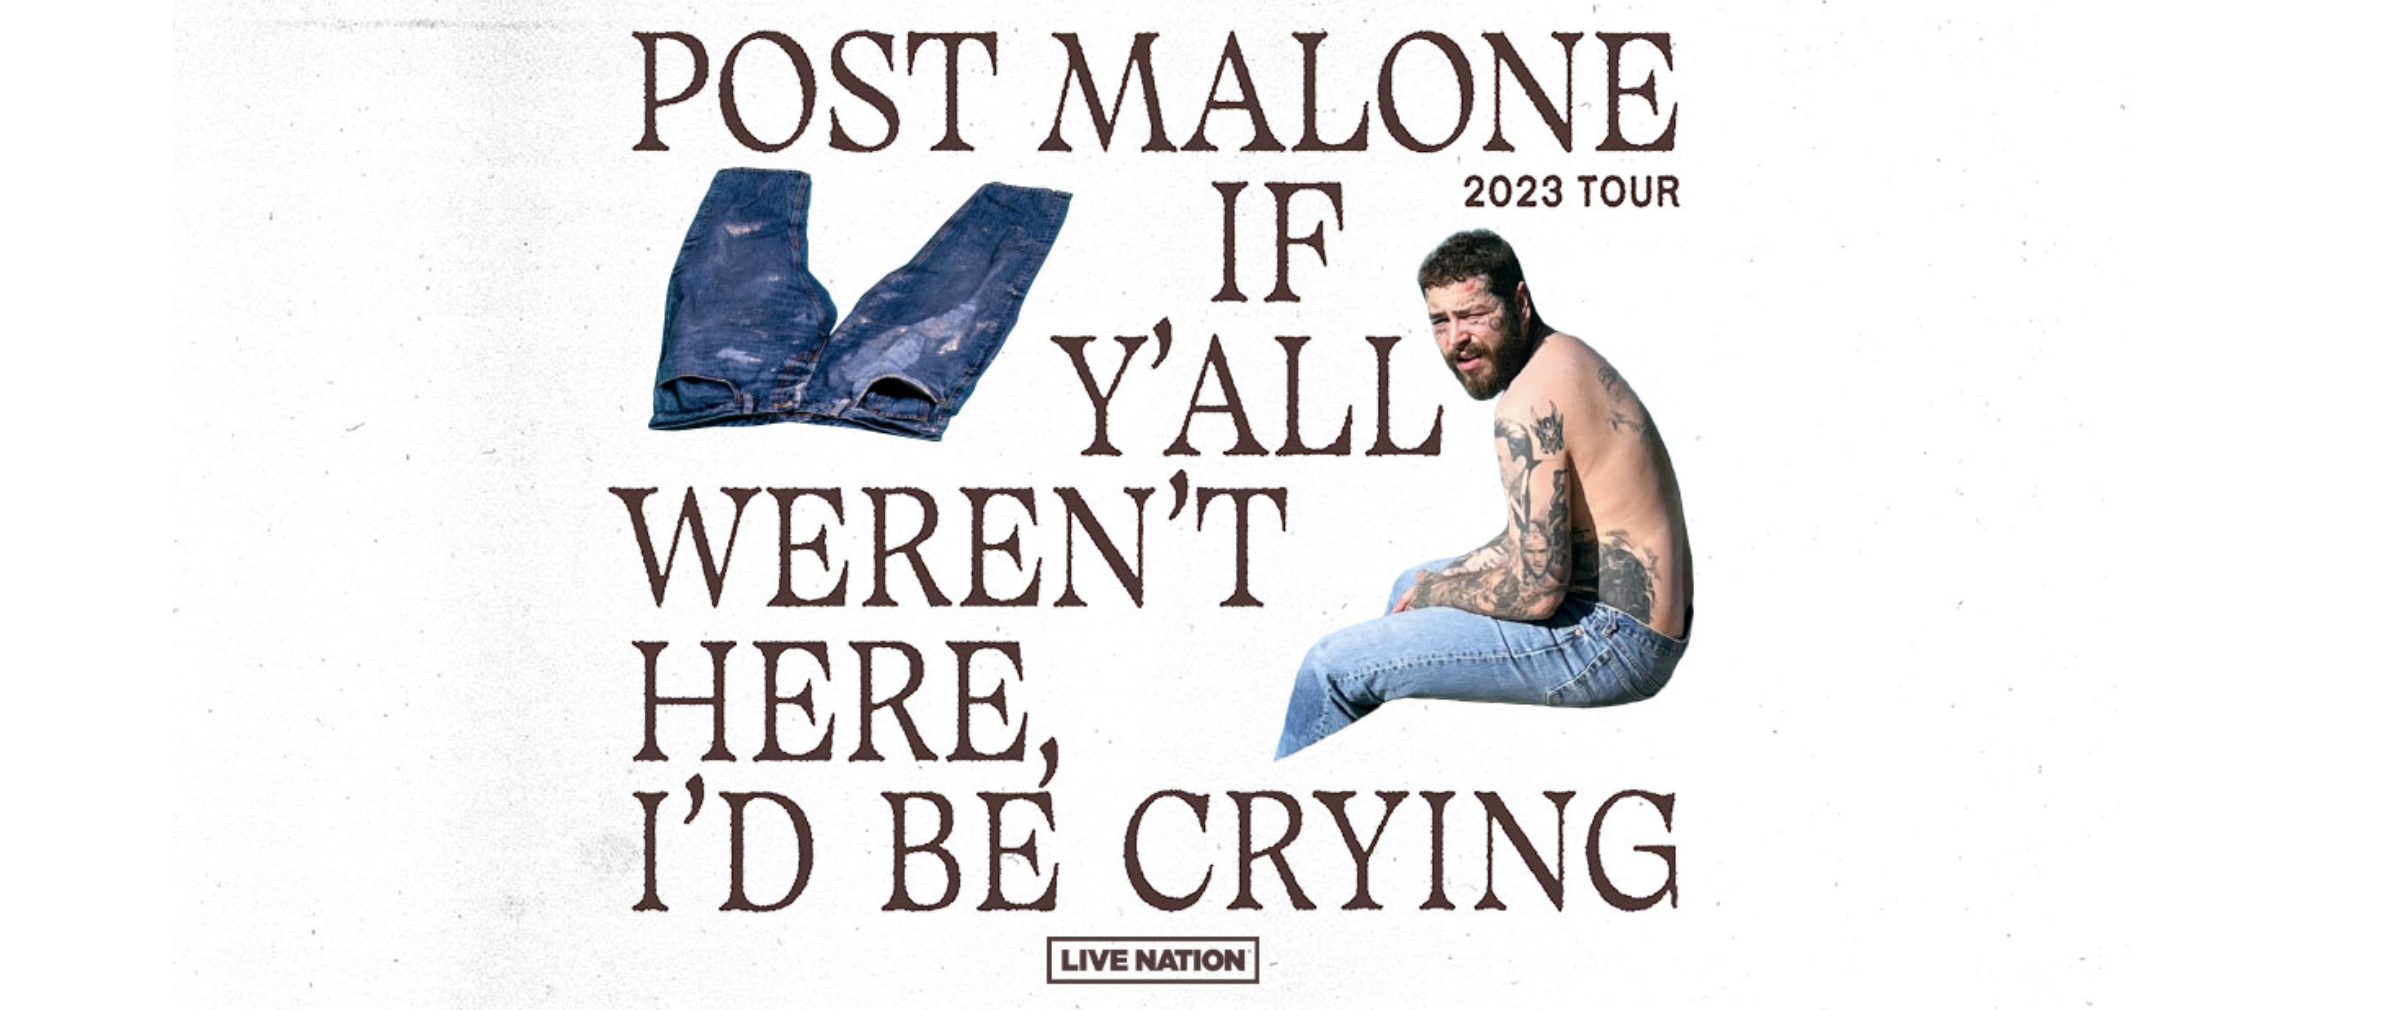 Post Alone Returns to Pennsylvania with the ‘If Y’all Weren’t Here, I’d Be Crying’ Tour